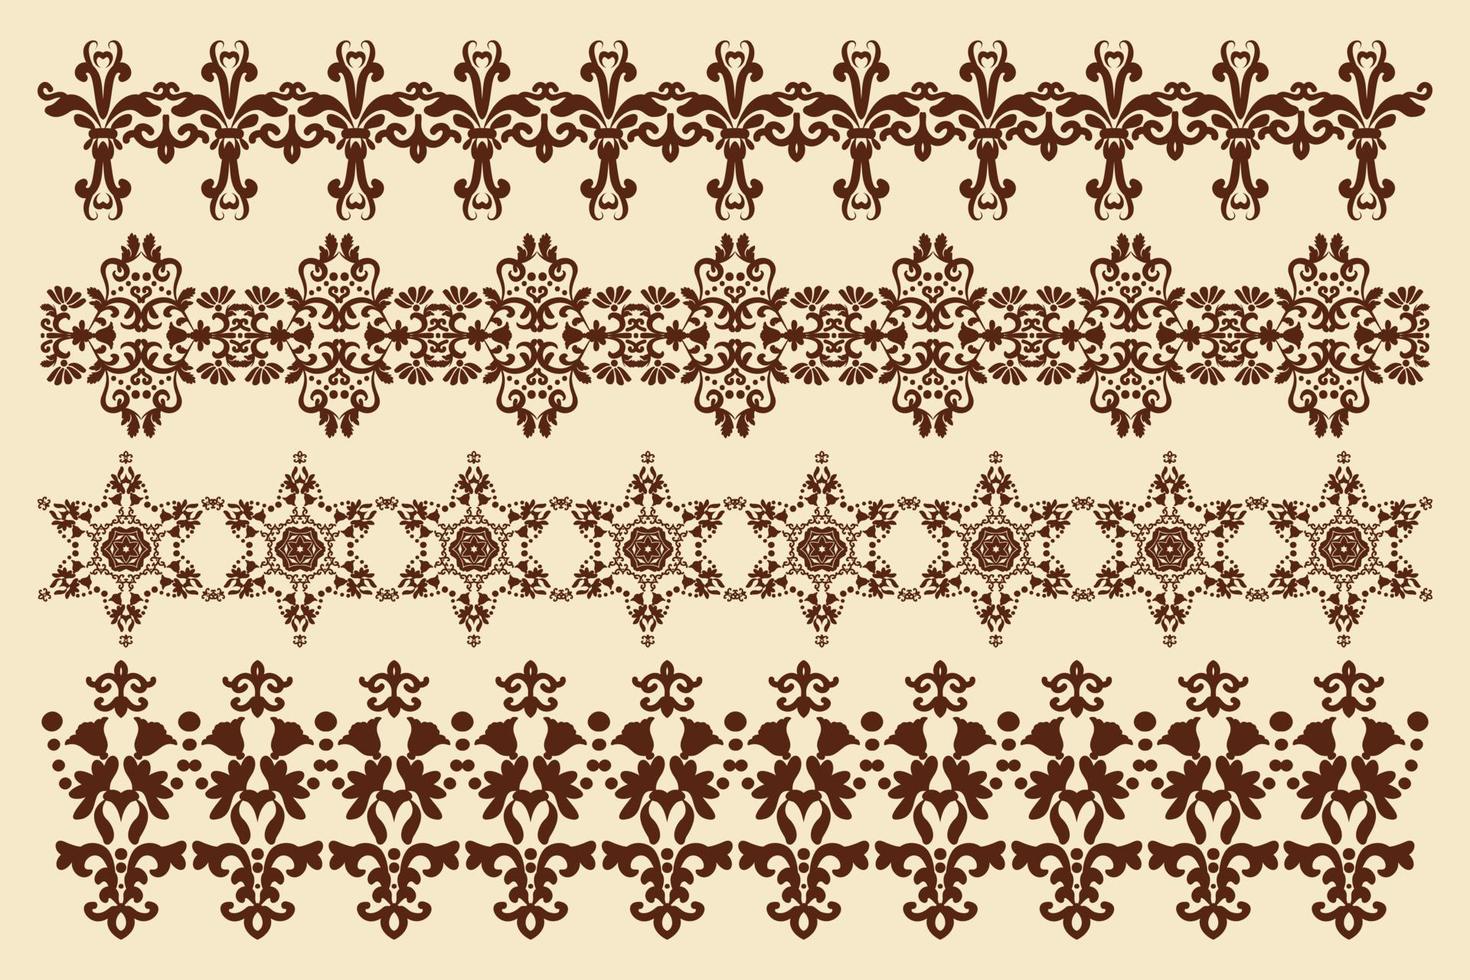 Patterned borders with floral elements. Set of ornaments in vintage style. Design element. Computer graphics. vector